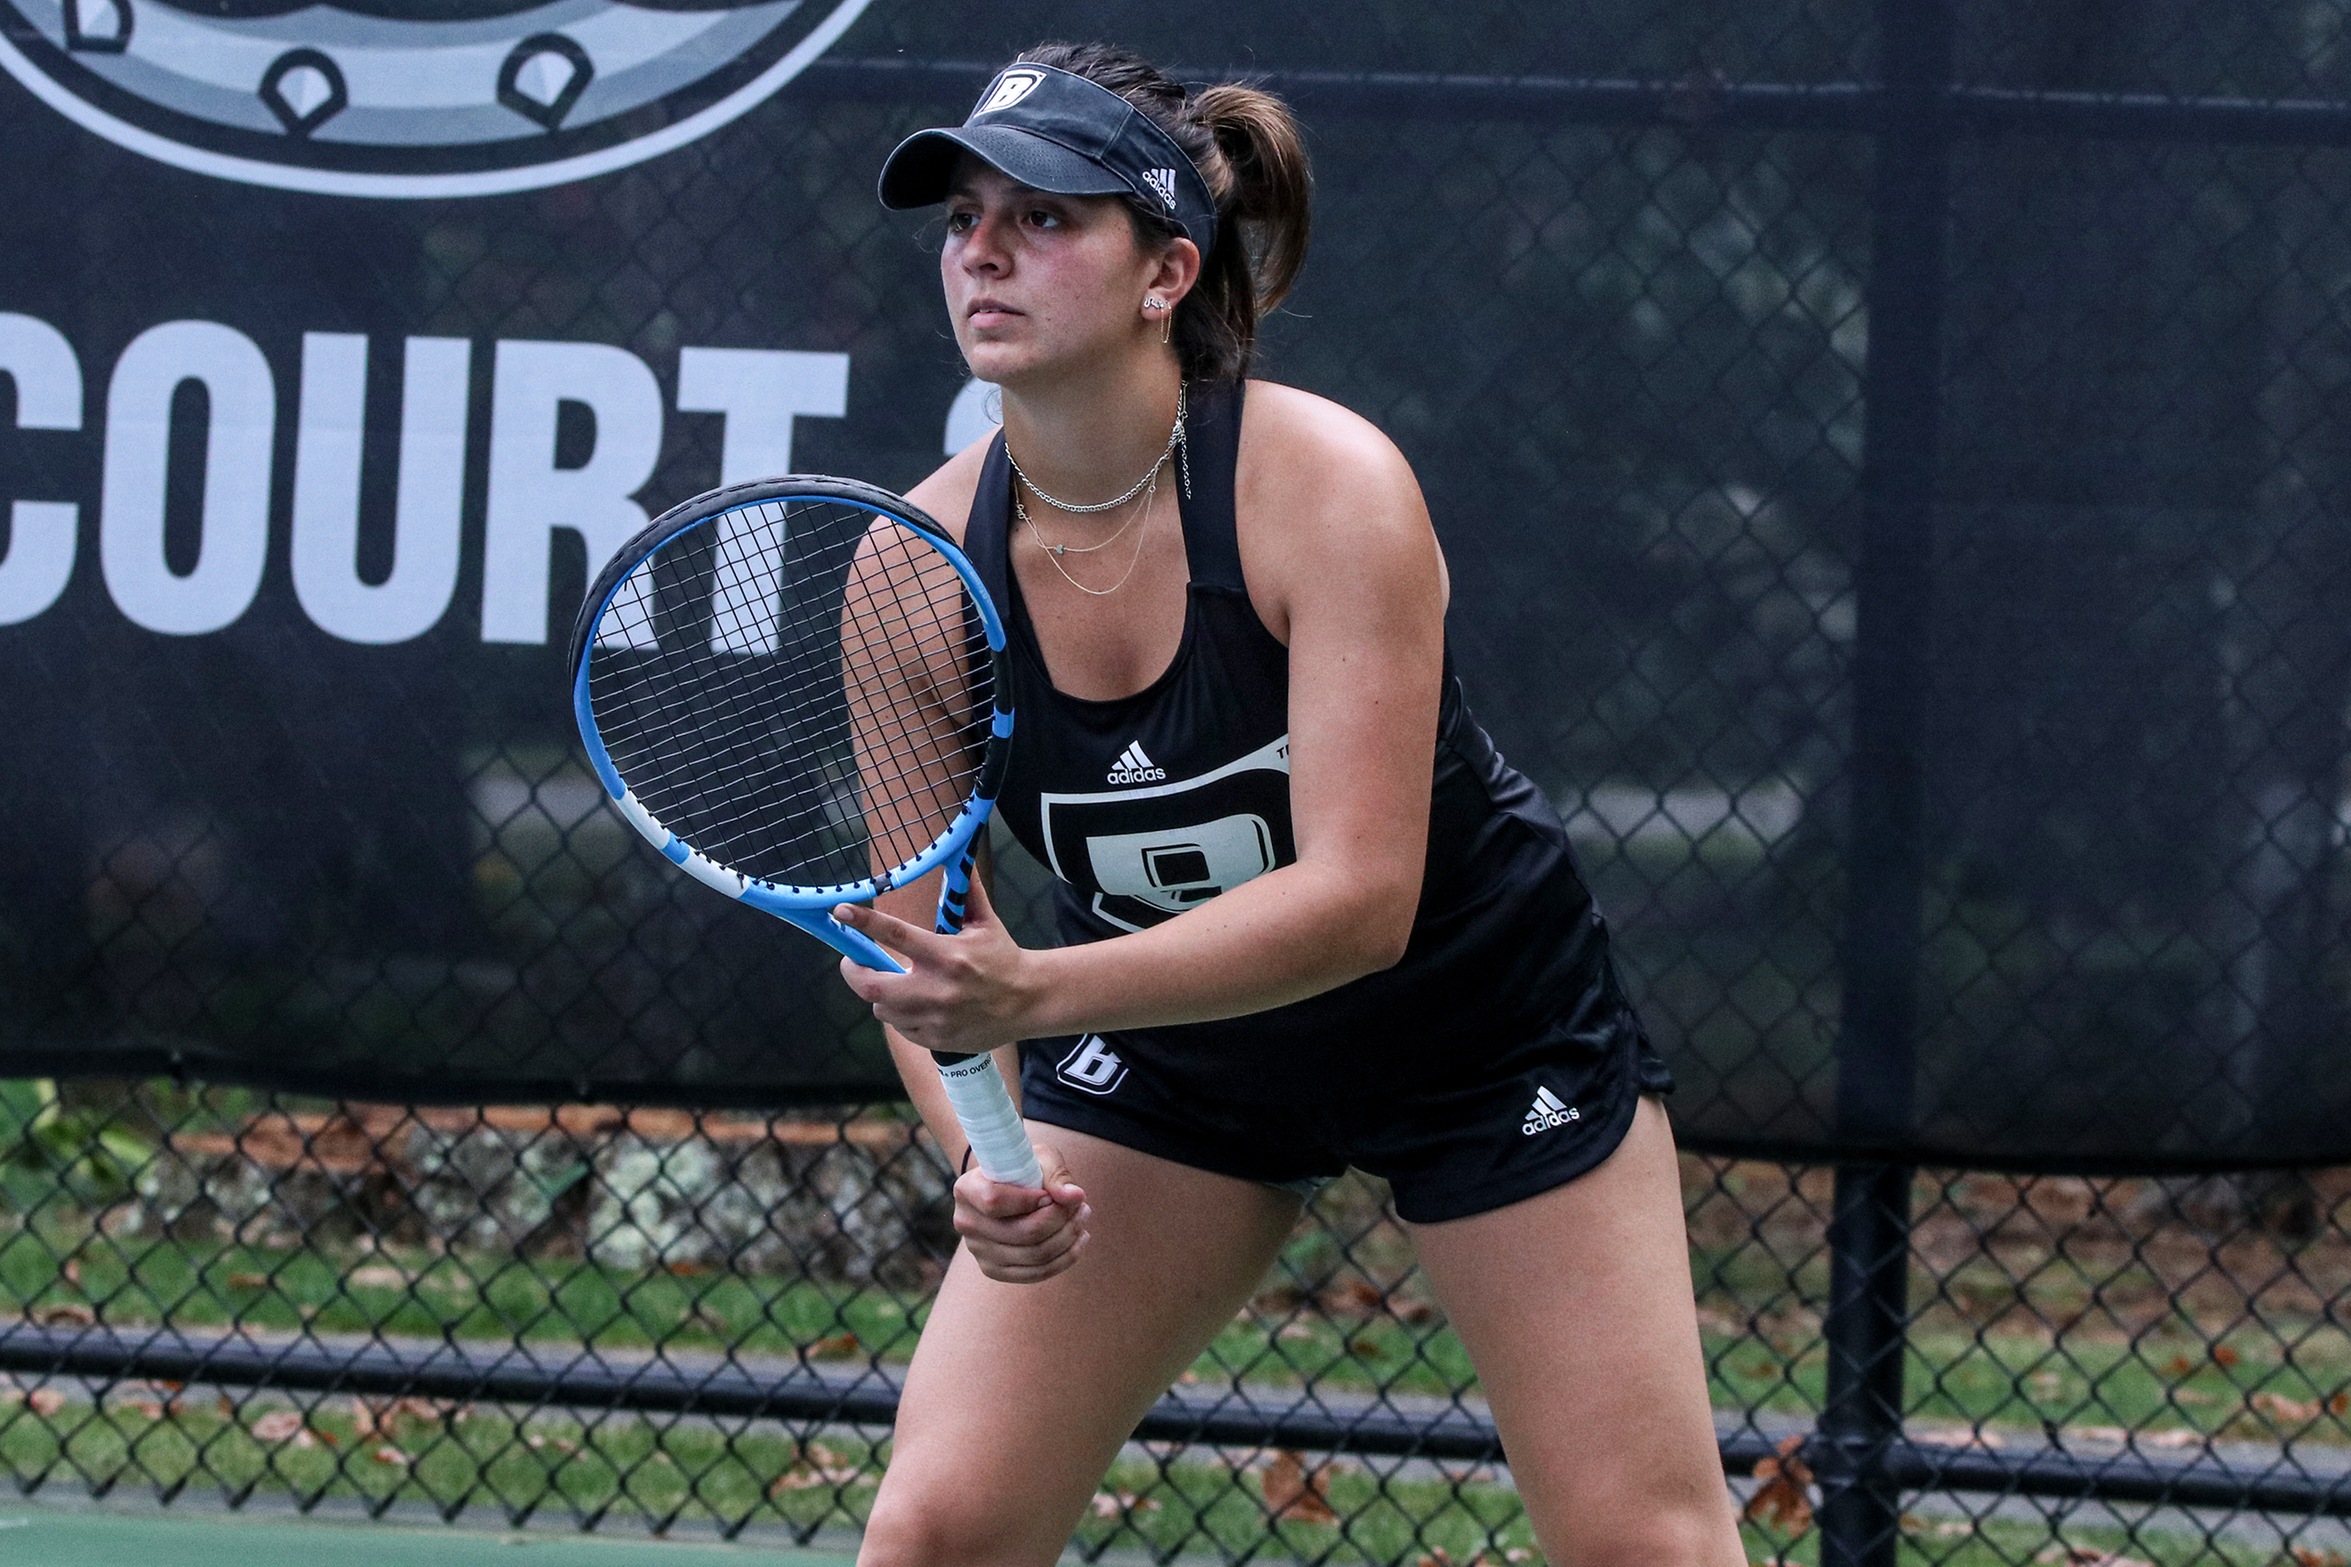 Bryant closes fall with strong showing vs Merrimack